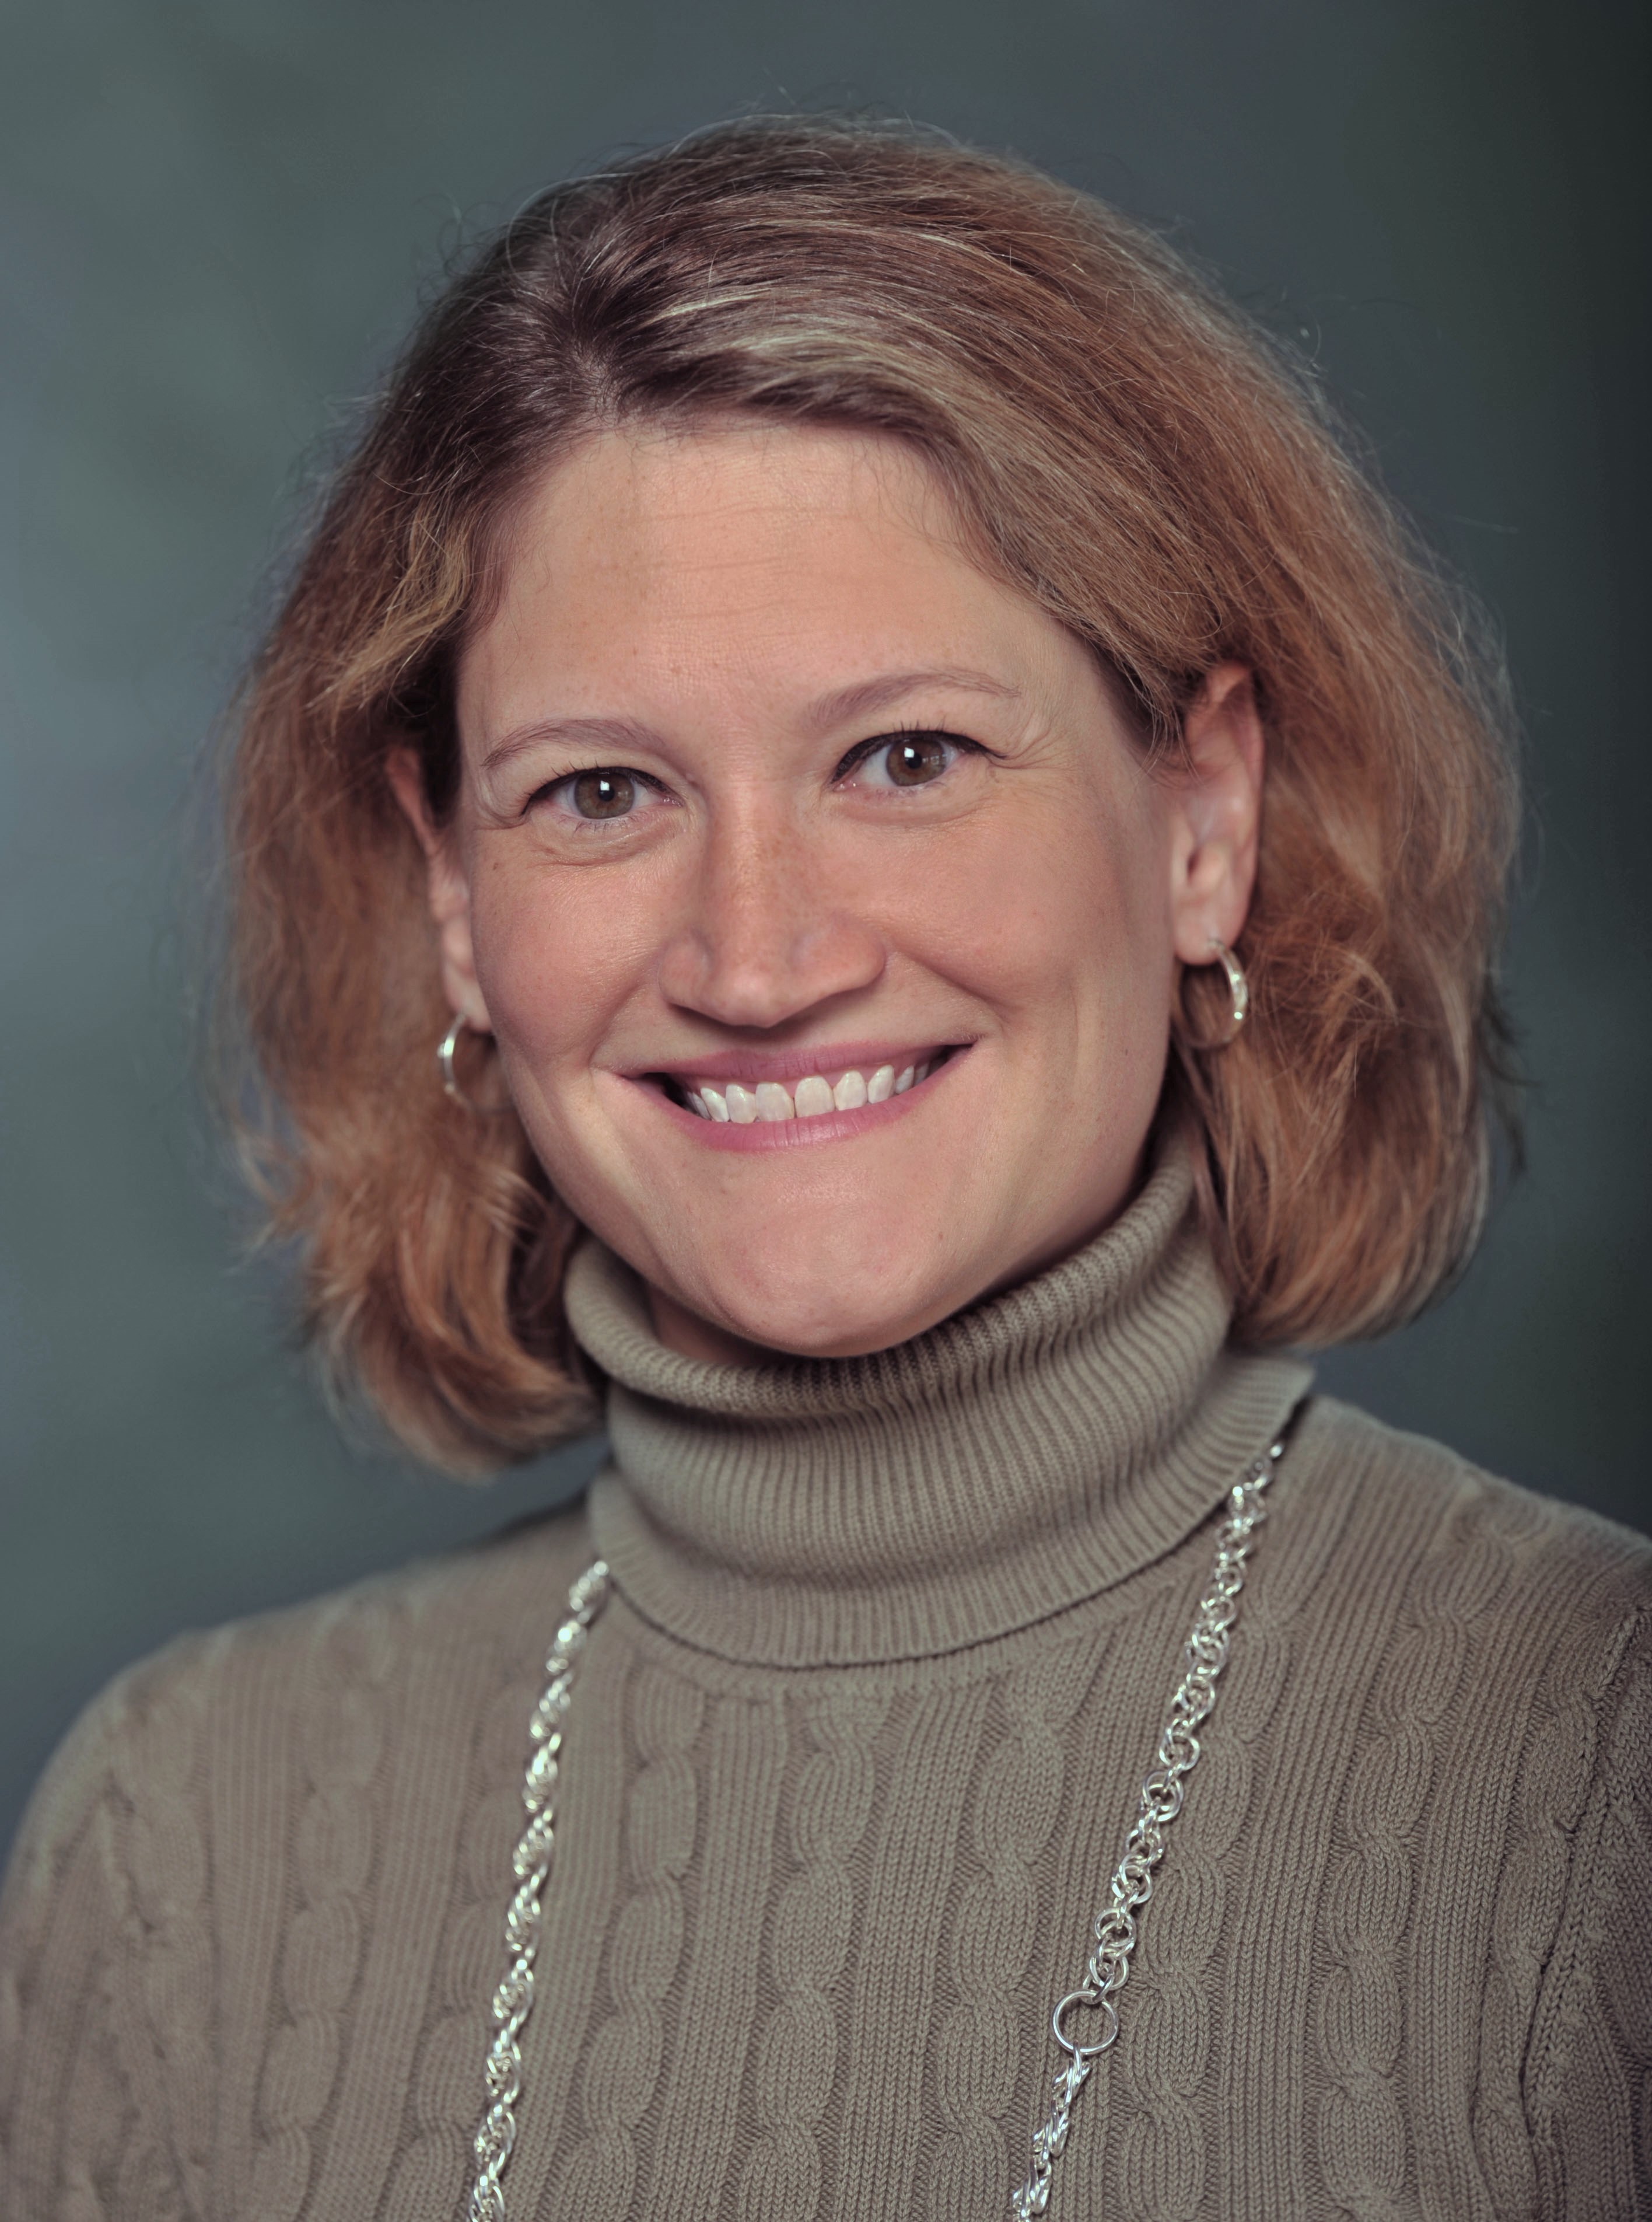 Marie Hansen, JD, PhD, is the dean of the College of Business at Husson University.